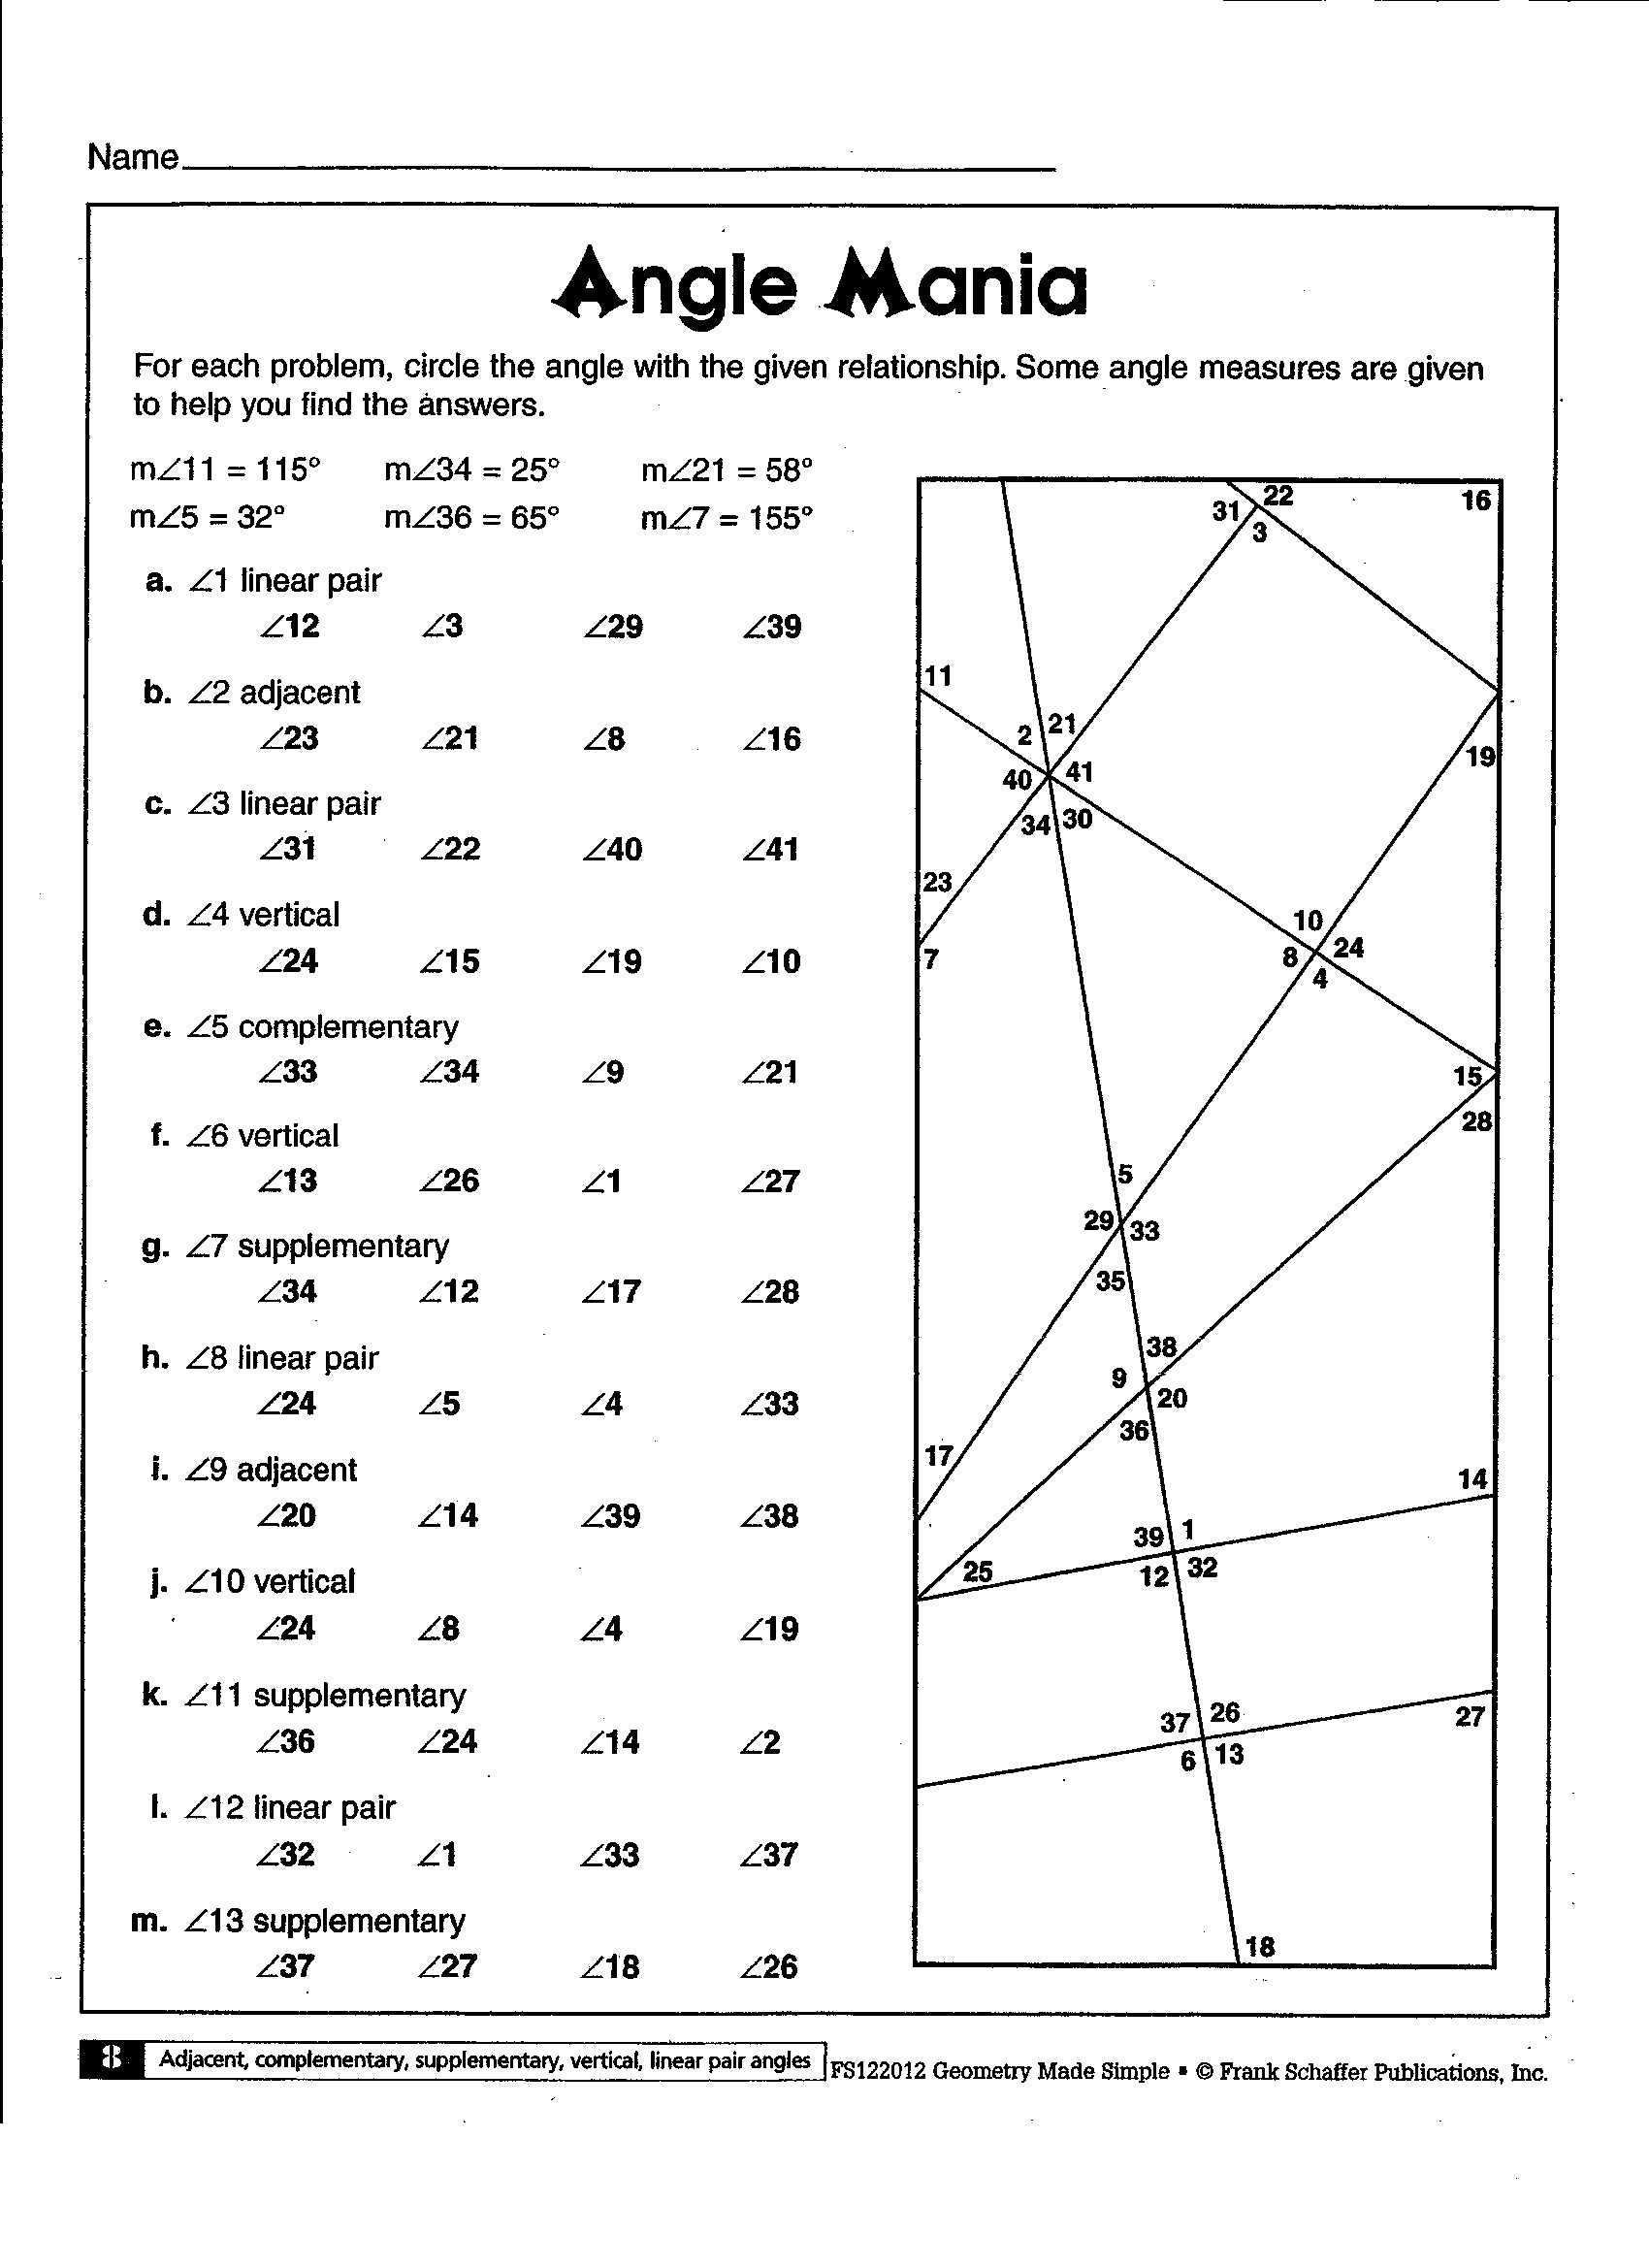 Angle Pair Relationships Worksheet Answers as Well as Supplementary Angles Worksheet Worksheet for Kids In English